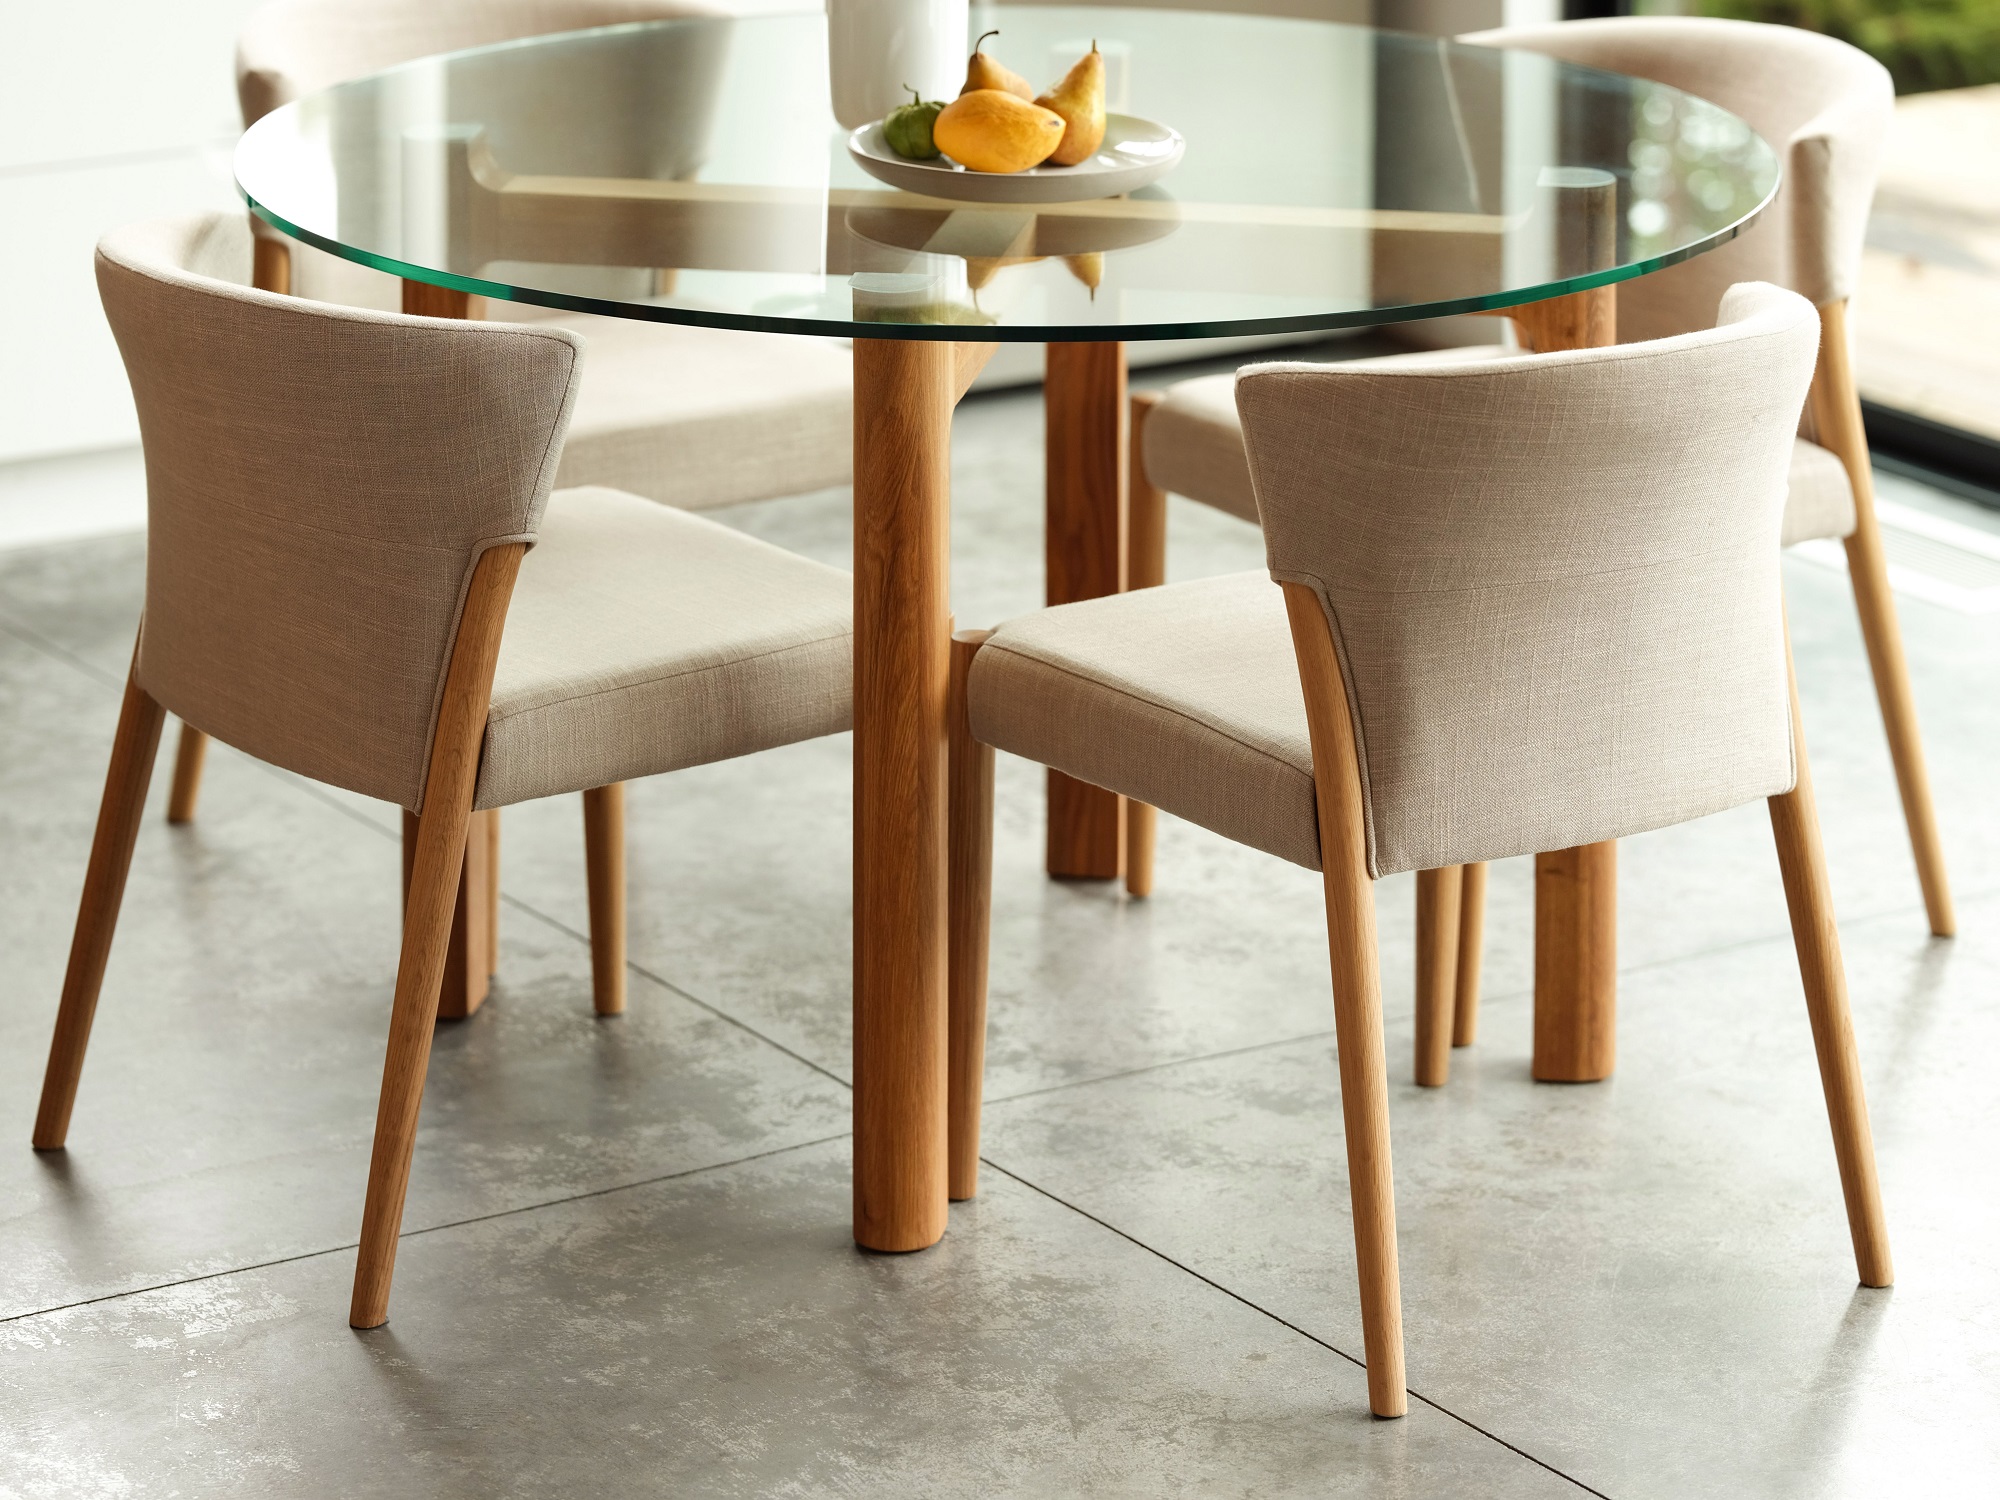 Wren Dining Chair, Shop Upholstered Dining Chairs